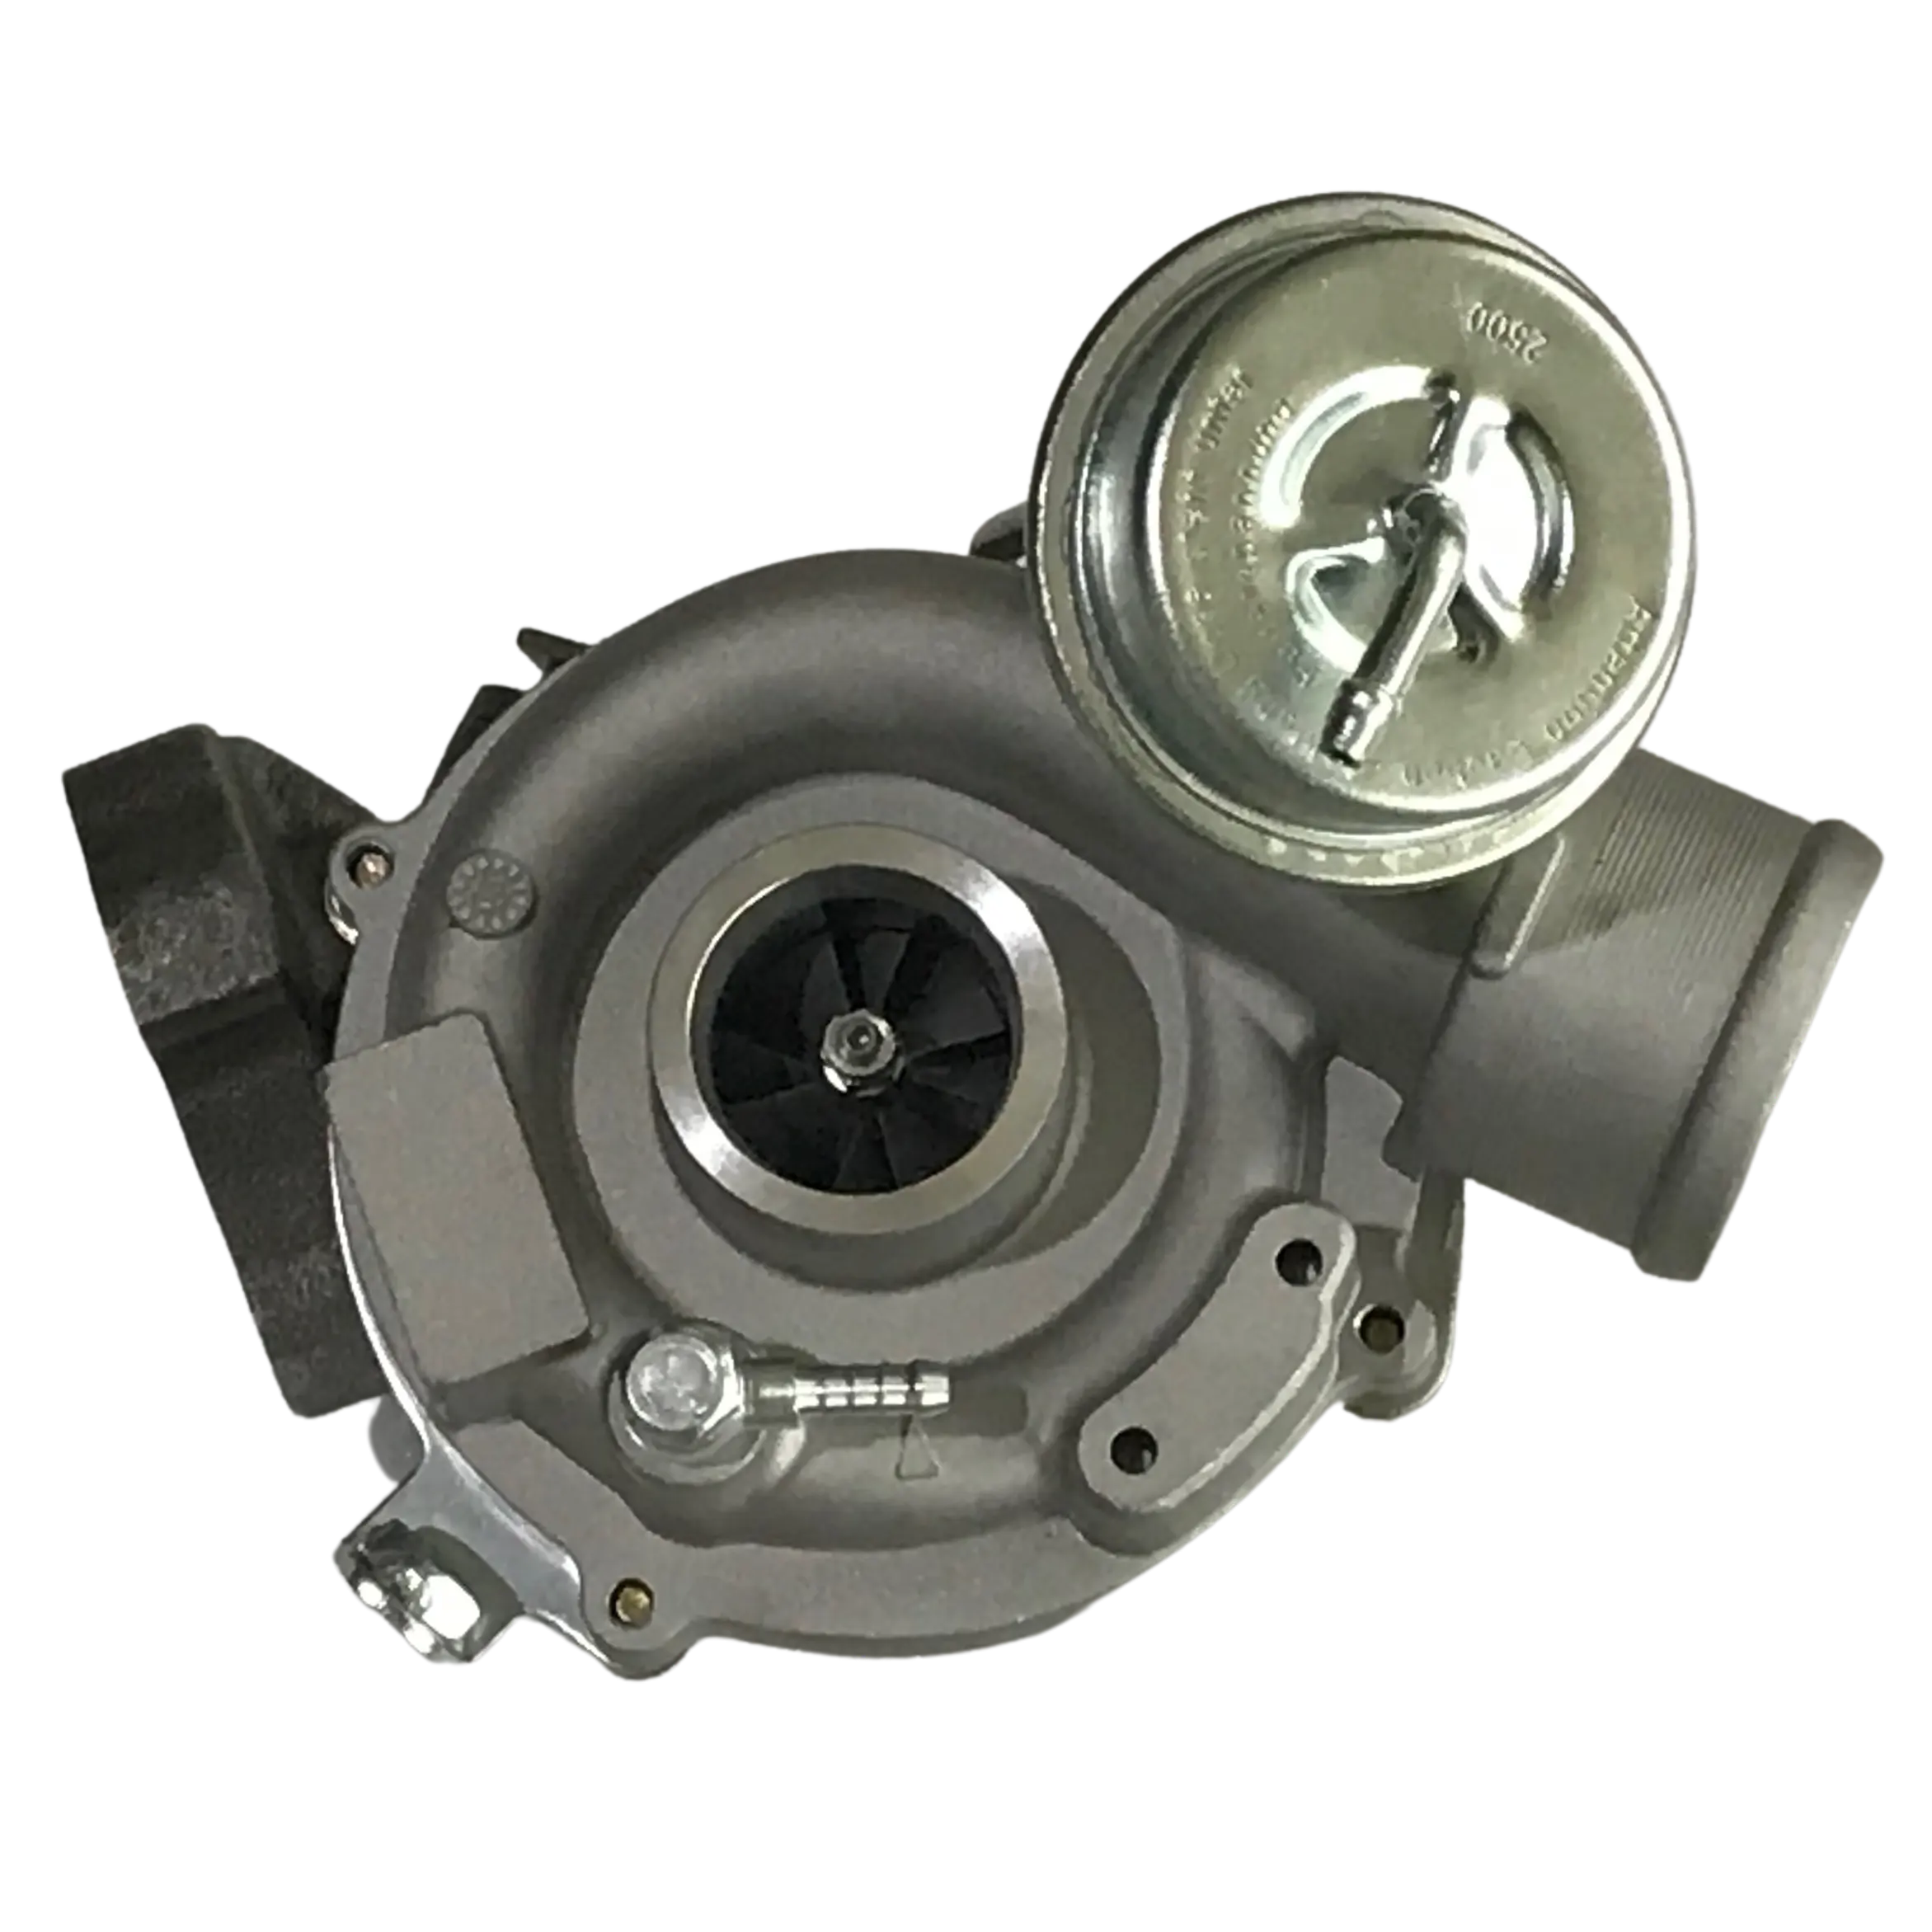 K03 Turbocharger 53039880016 Standard K03-016 Turbo Assembly 078145701S Left Side for 2.67L A6 S4 with AJK, ARE, BES, AGB Engine